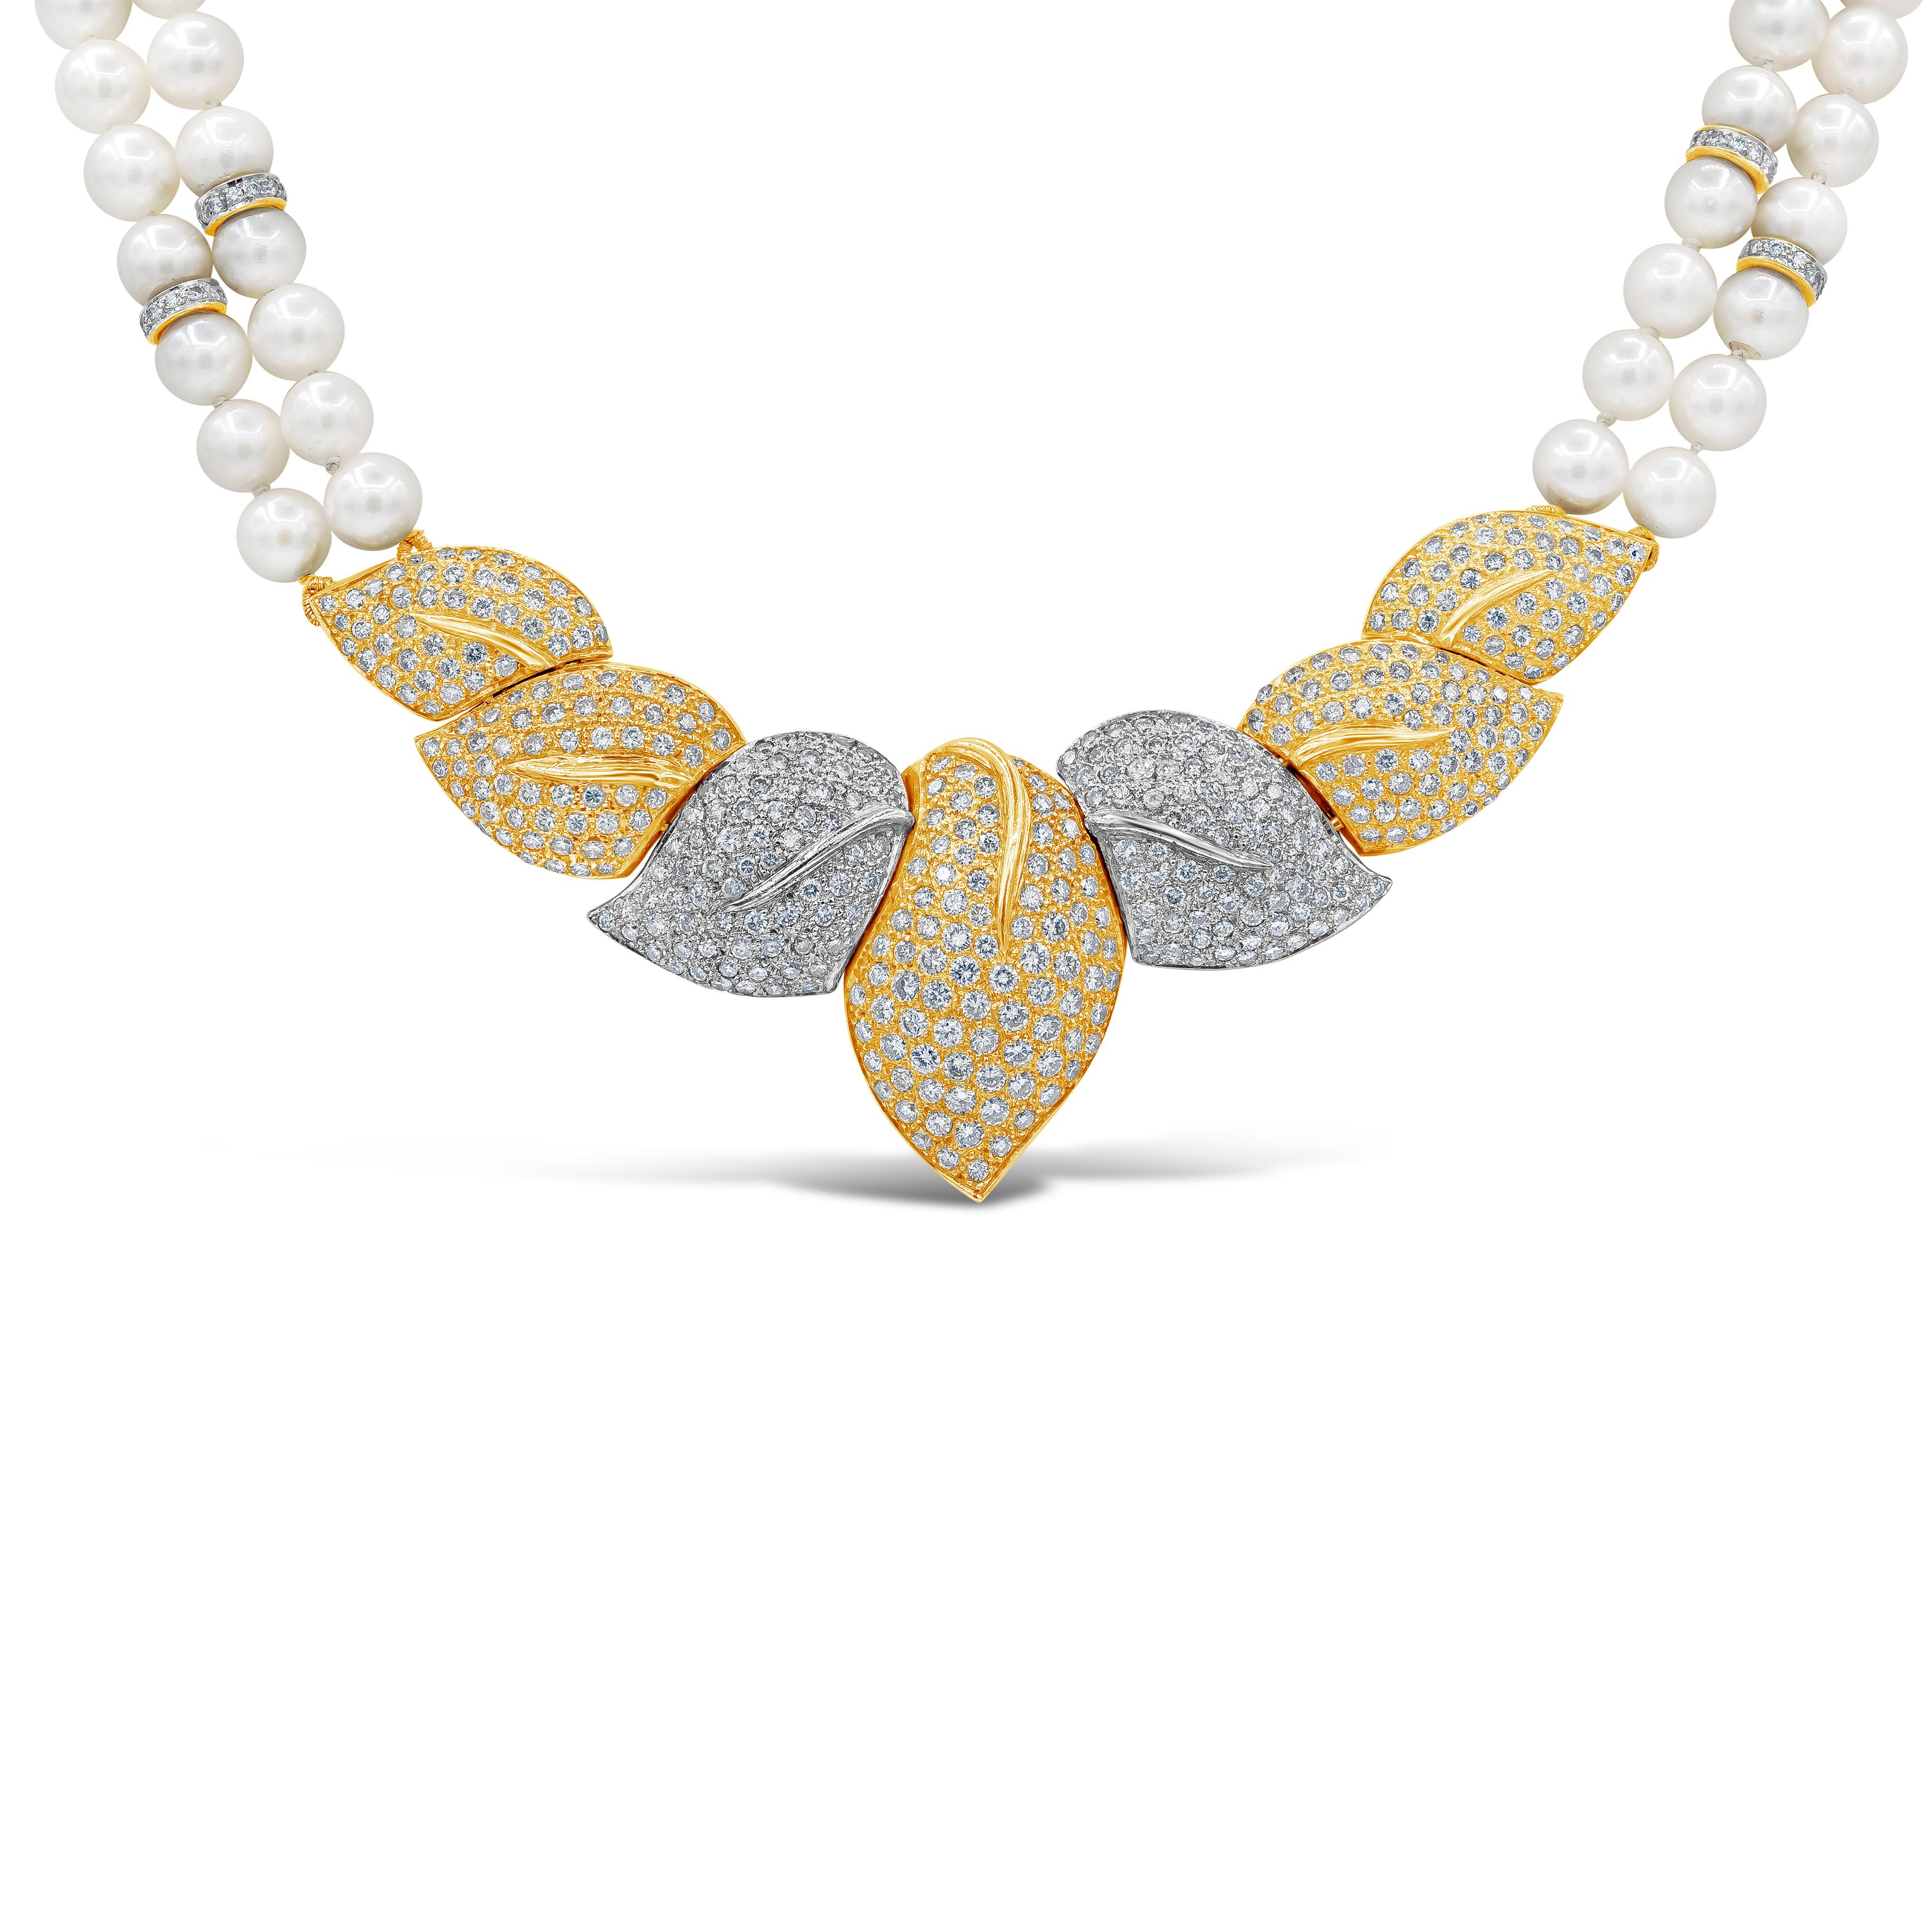 Showcasing intricately-designed leaves encrusted with diamonds, suspended on two strands of 6.10-6.50 millimeter pearls. Diamonds weigh 14.30 carats total. Made in 18 karat gold.